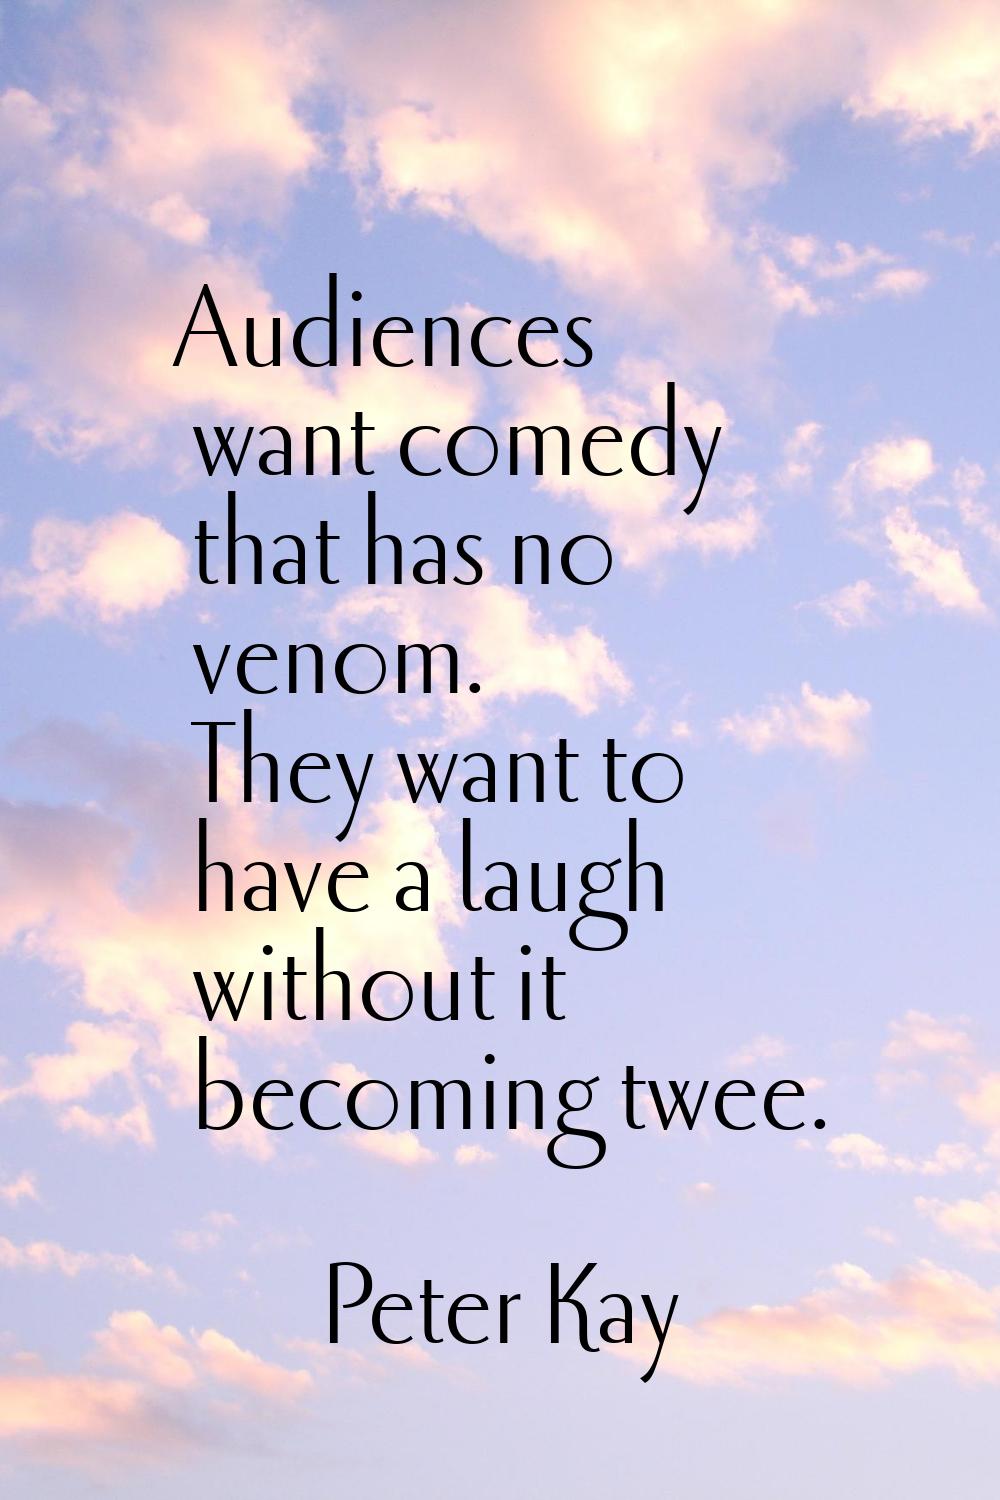 Audiences want comedy that has no venom. They want to have a laugh without it becoming twee.